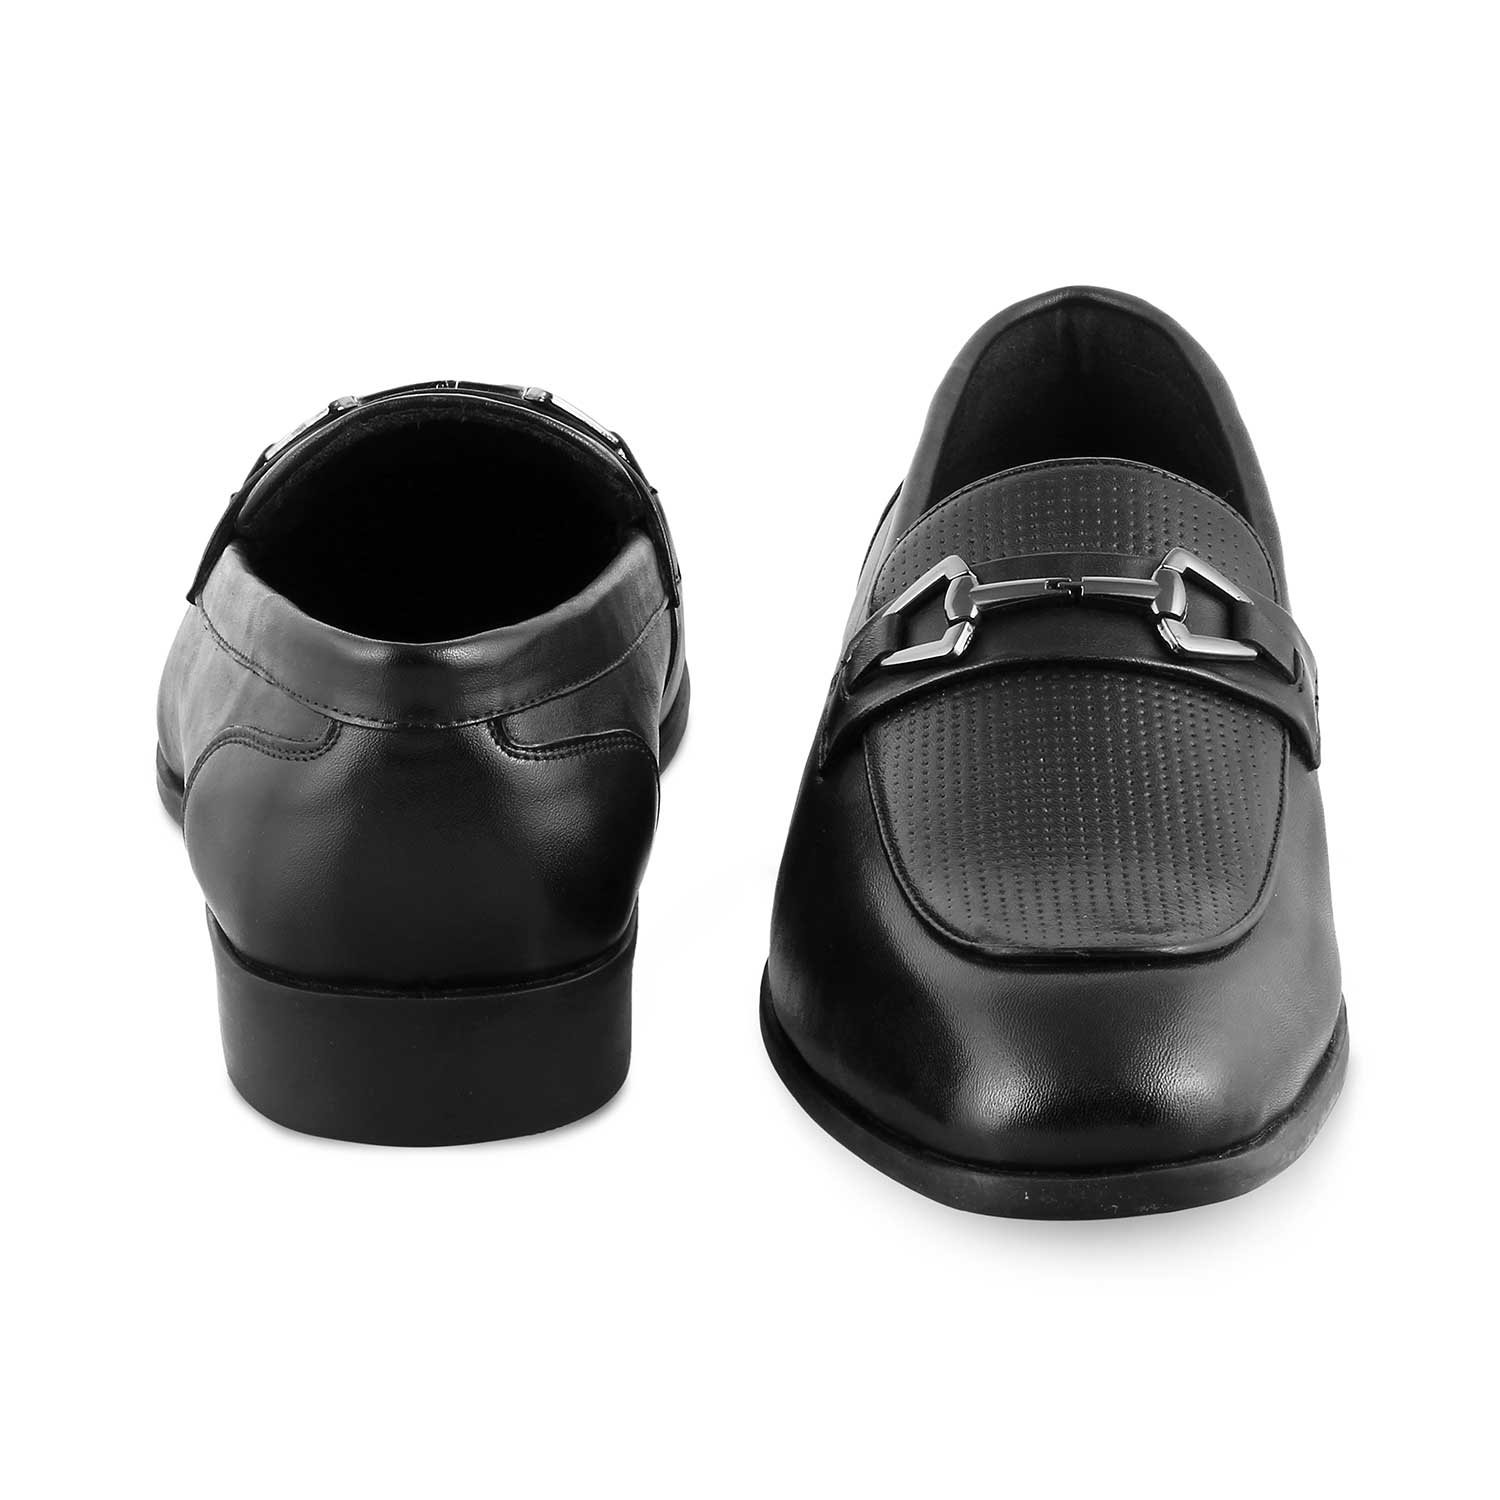 The Montli Black Men's Leather Loafers Tresmode - Tresmode